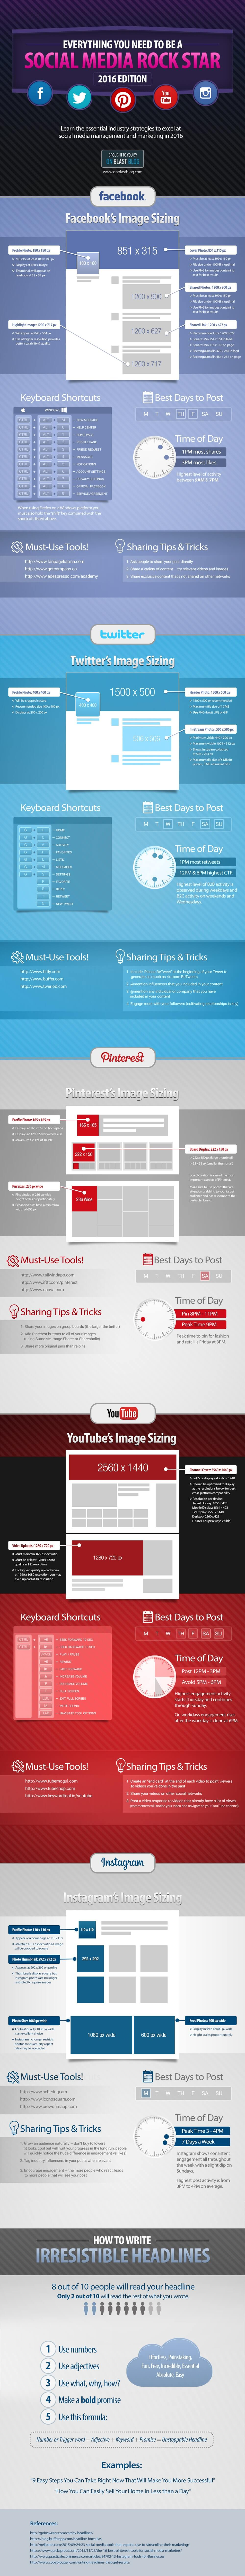 This is the social media marketing infographic.